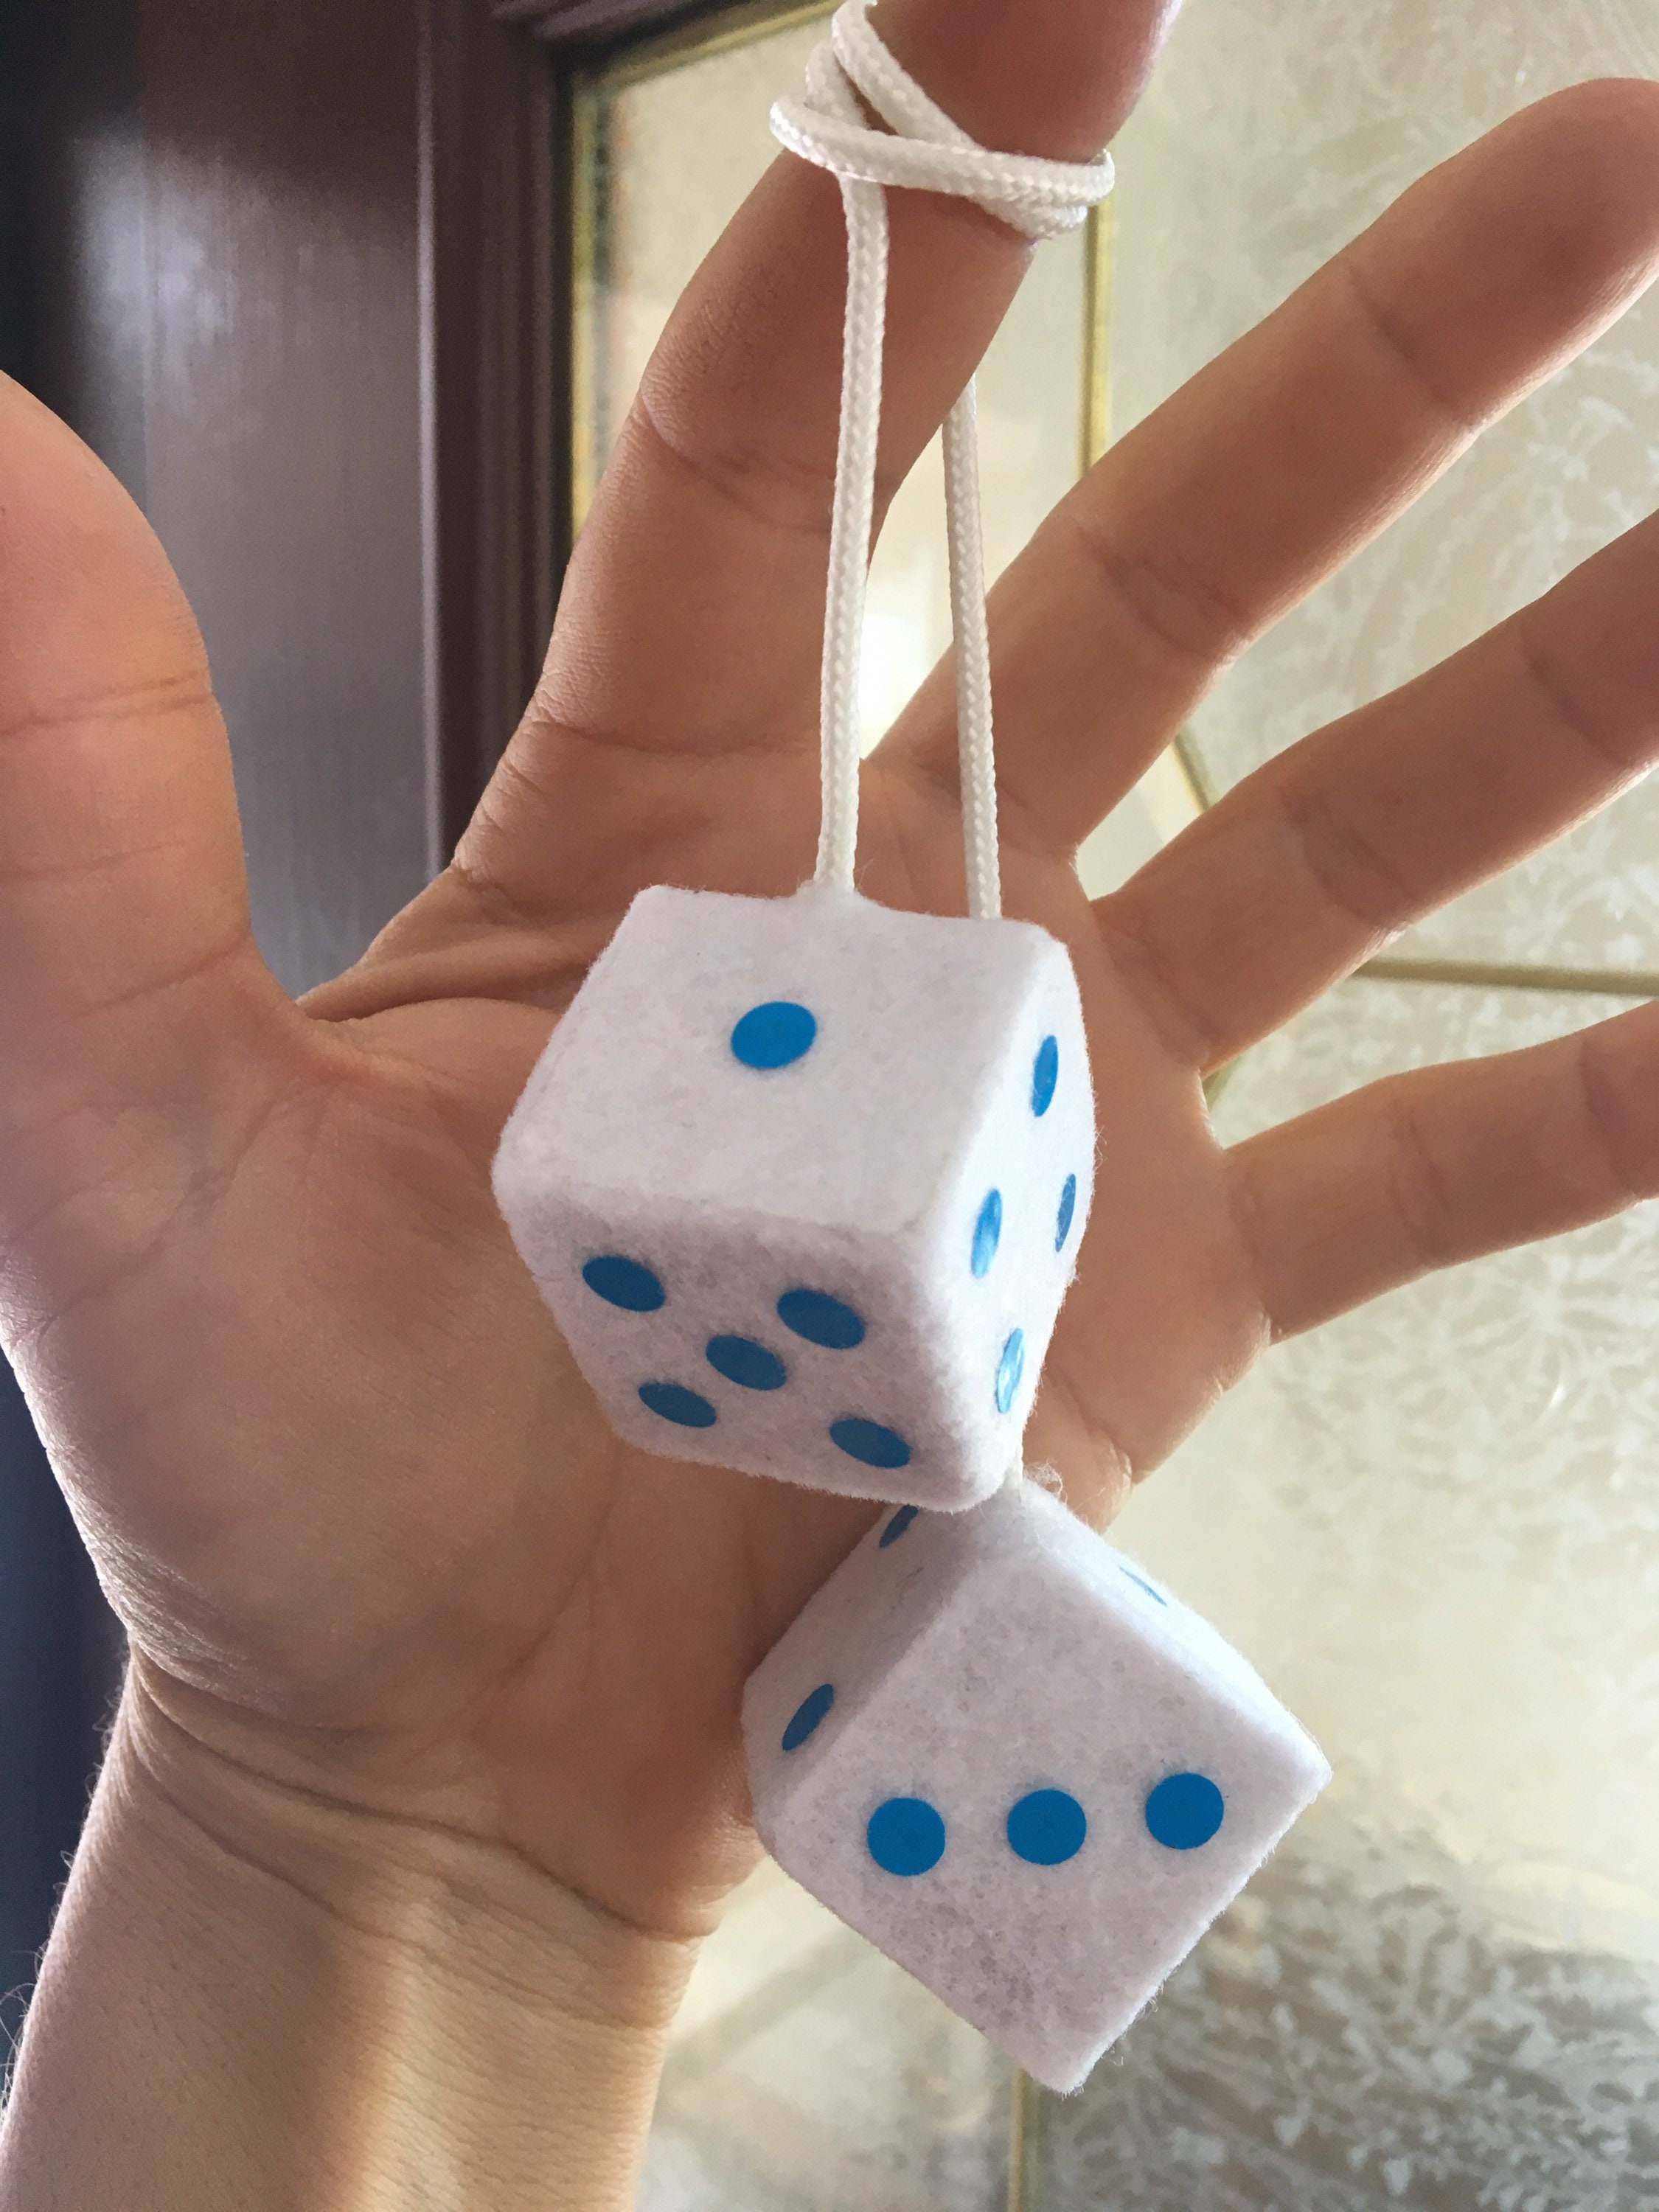 Royal Blue Fuzzy Dice With White Dots and Chain or Cord / Kansas City  Royals, Chicago Cubs, Car Accessories, Charms, Blue Car Accessories 